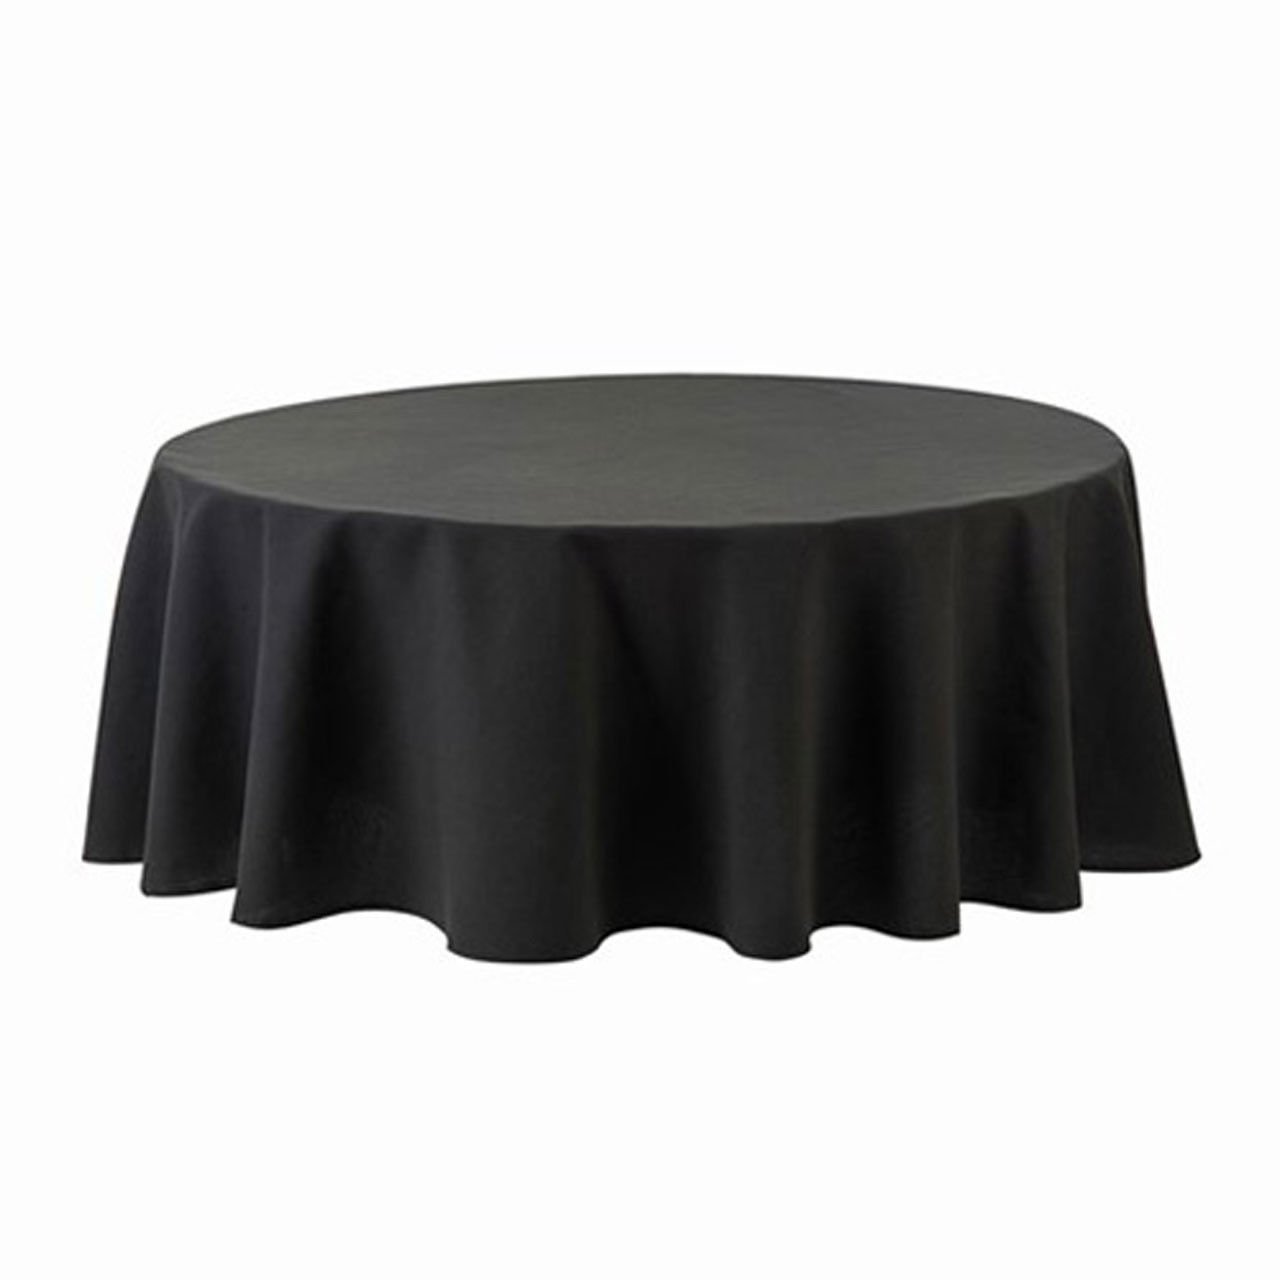 Where is this black round tablecloth imported from?